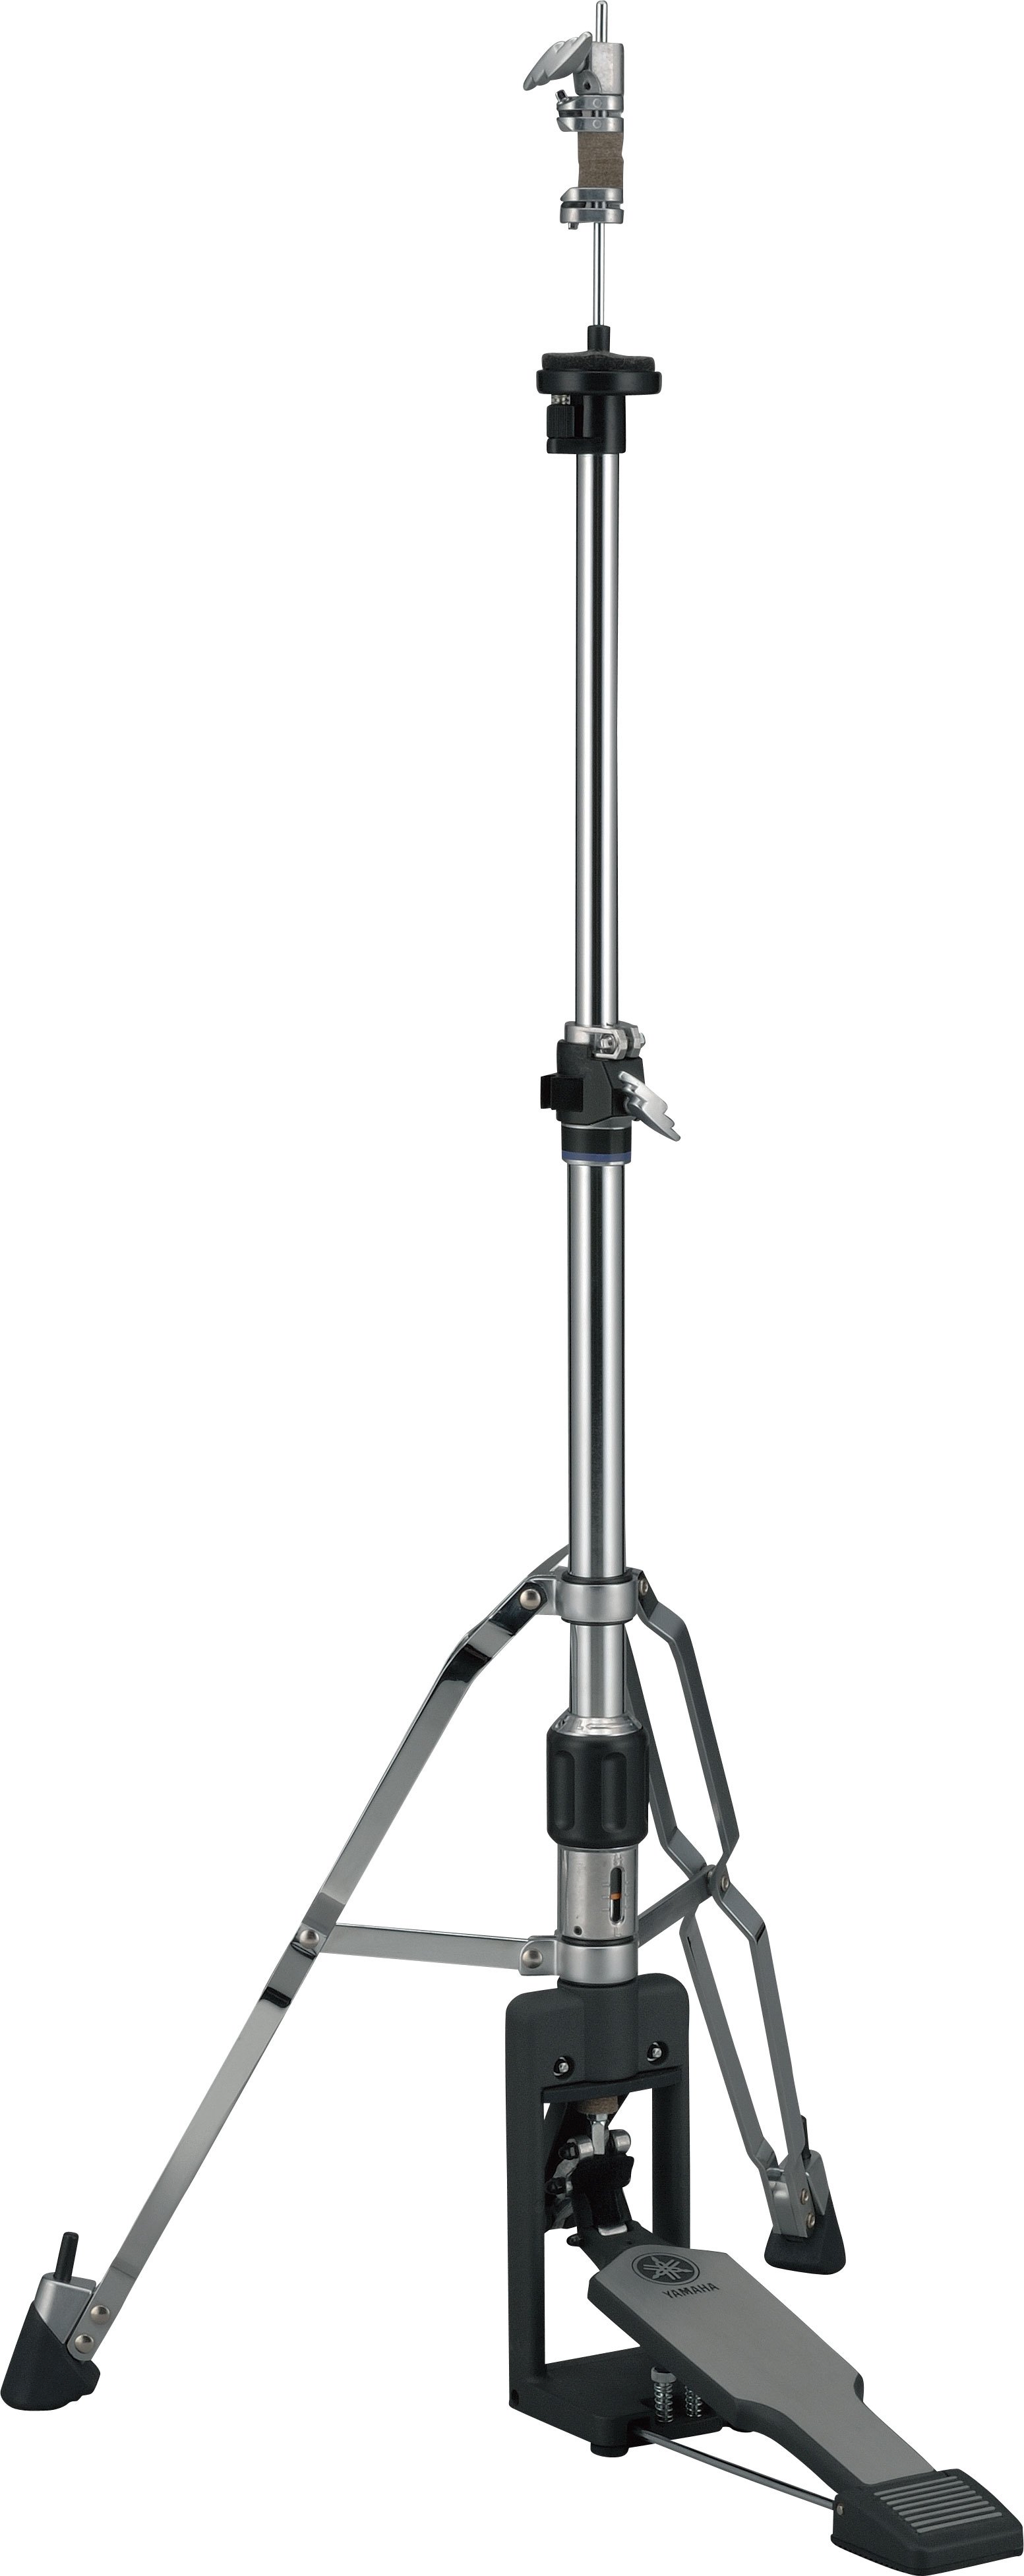 Hi Hat Stands Overview Hardware Racks Acoustic Drums Drums Musical Instruments Products Yamaha Other European Countries